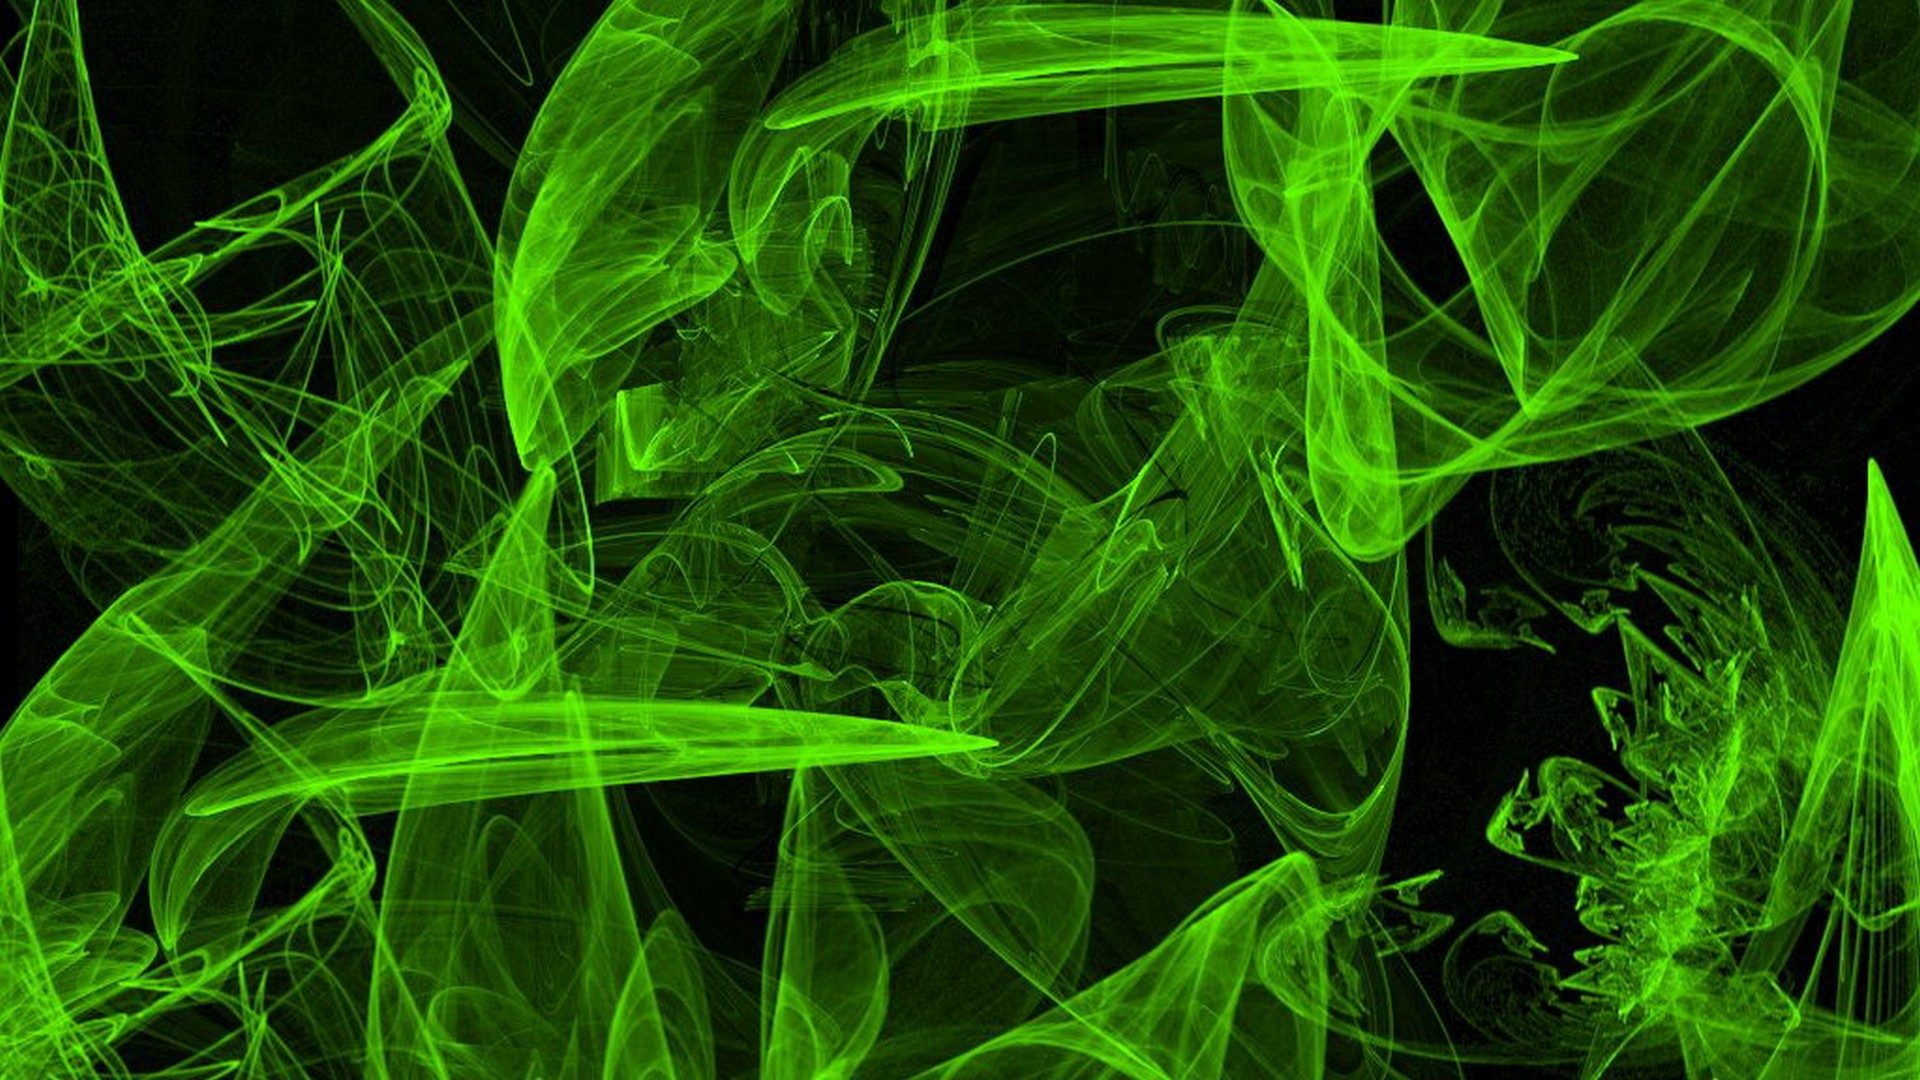 Neon Green Background Wallpaper HD With Resolution 1920X1080 pixel. You can make this wallpaper for your Desktop Computer Backgrounds, Mac Wallpapers, Android Lock screen or iPhone Screensavers